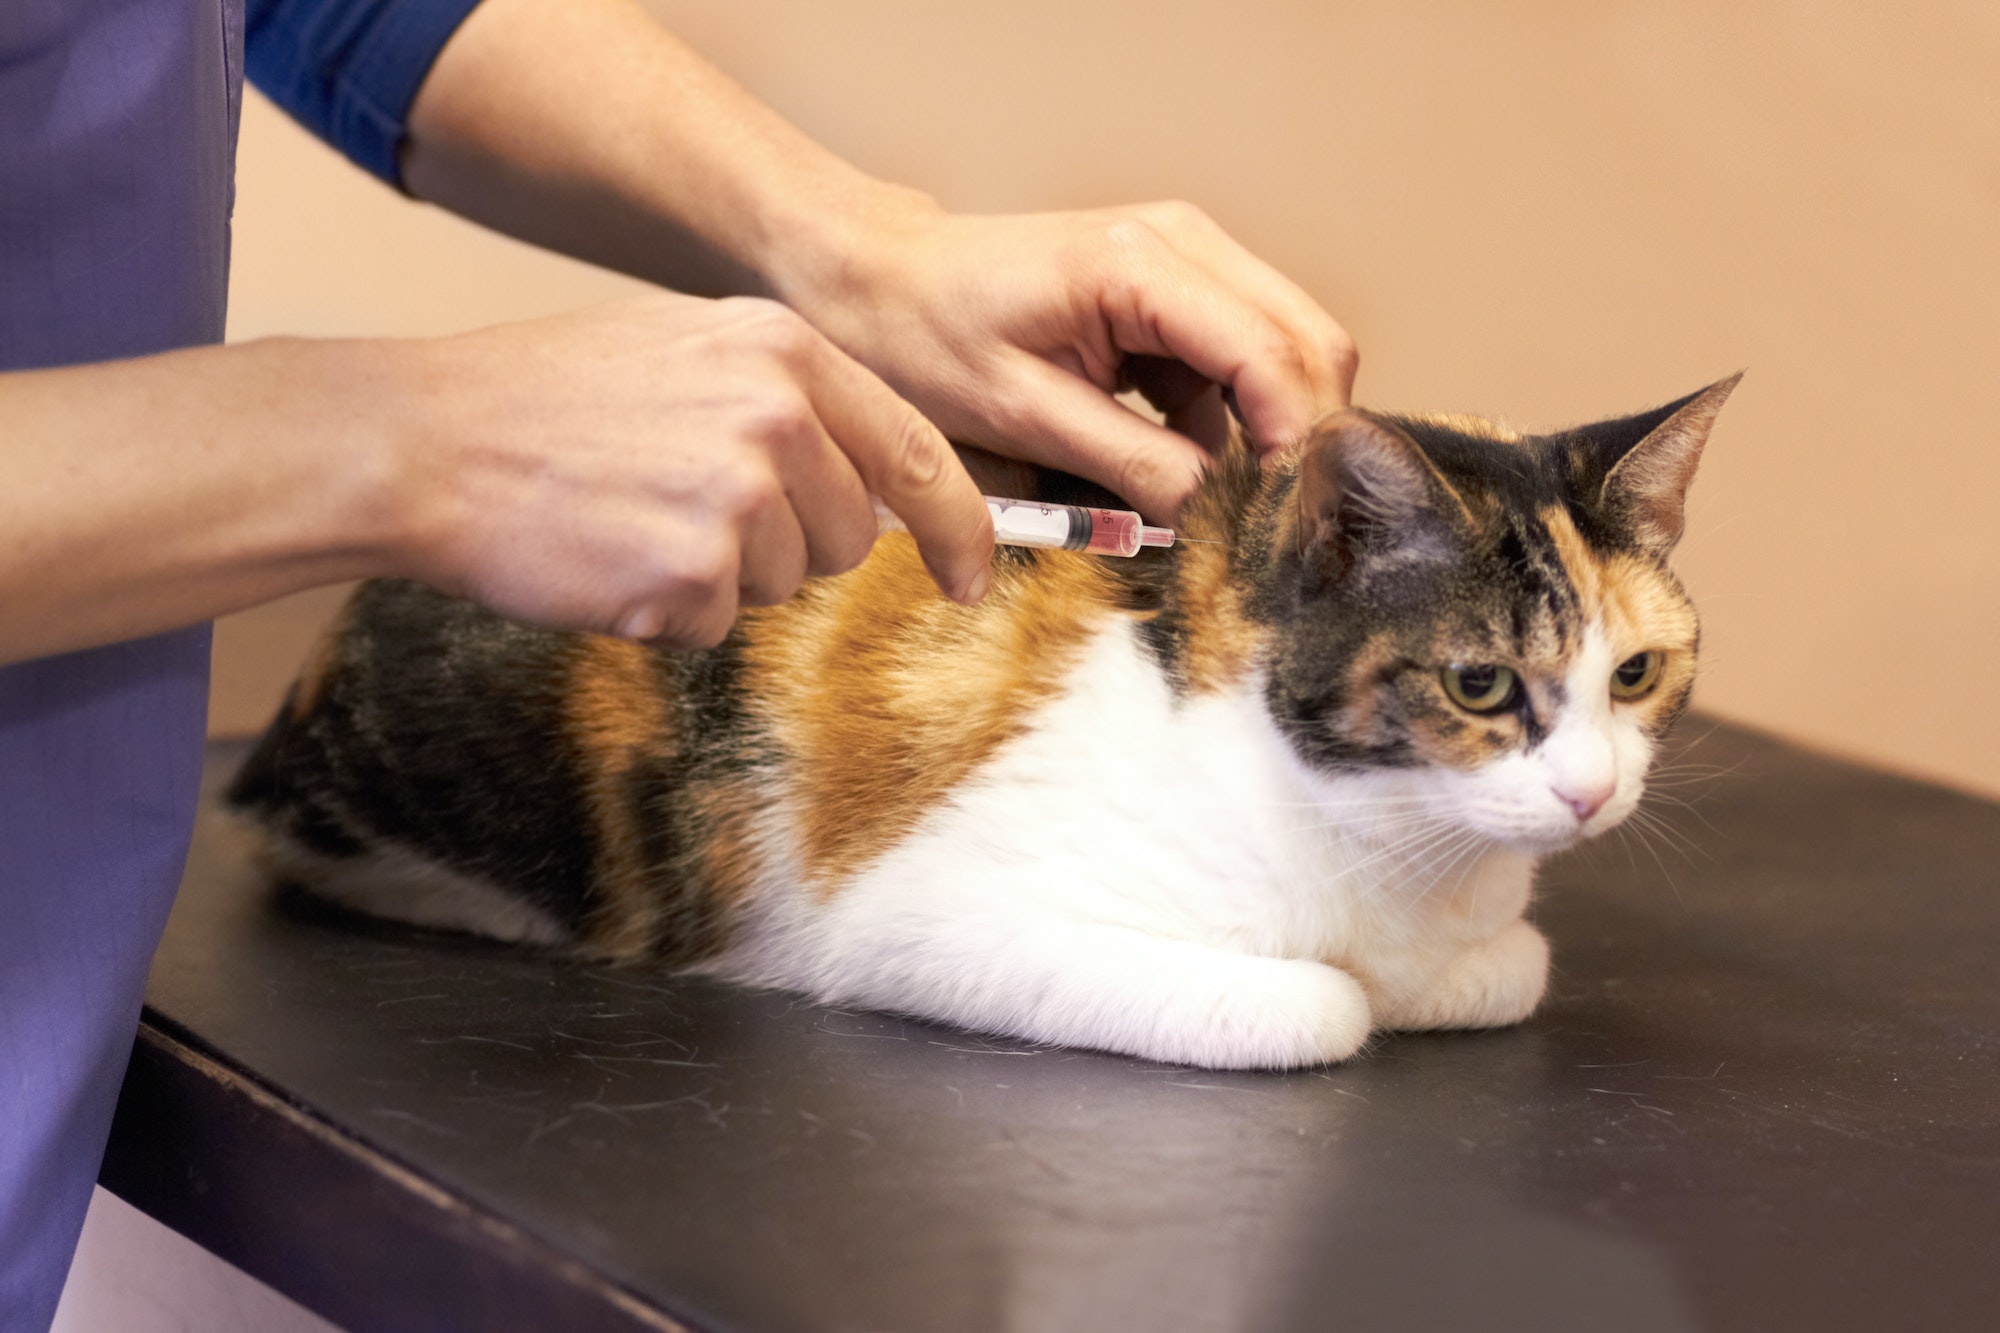 Gentle as she can be. Closeup shot of a cat getting examined by a vet.